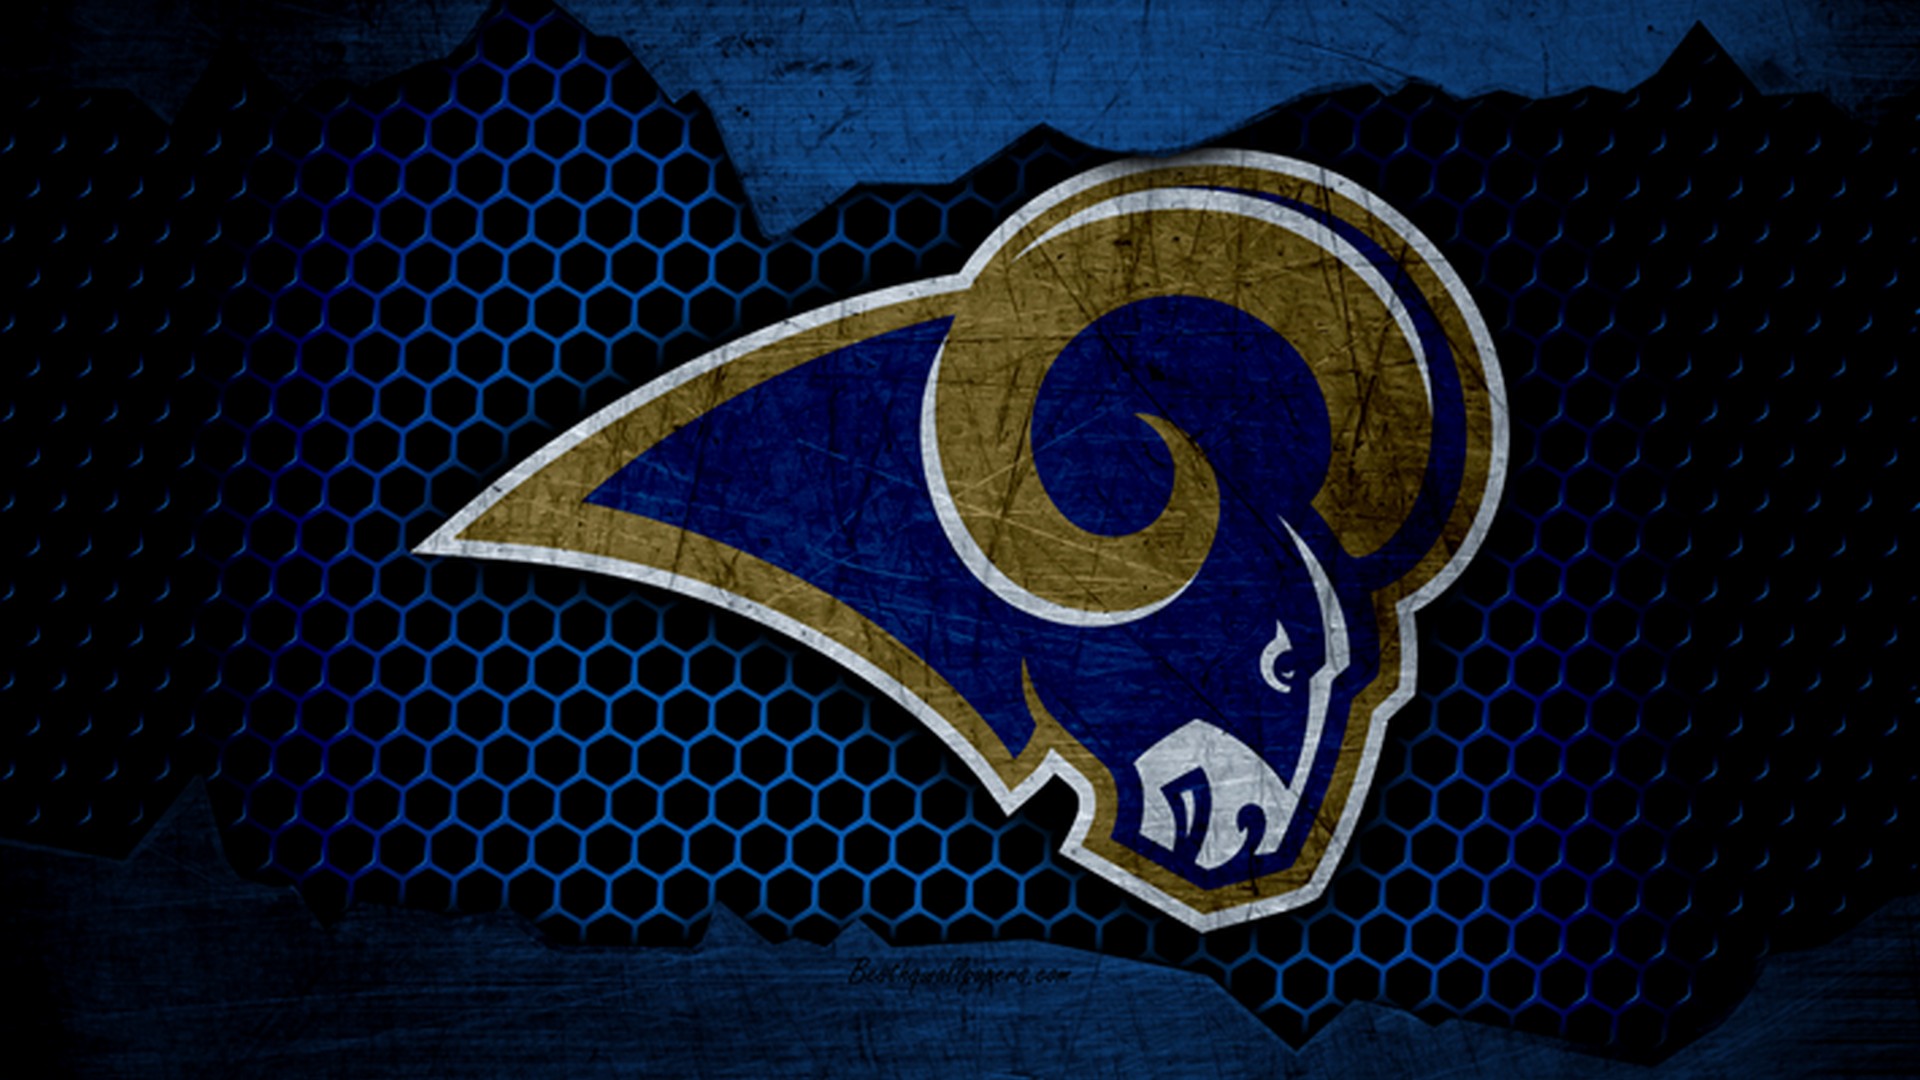 HD Backgrounds Los Angeles Rams With Resolution 1920X1080 pixel. You can make this wallpaper for your Mac or Windows Desktop Background, iPhone, Android or Tablet and another Smartphone device for free